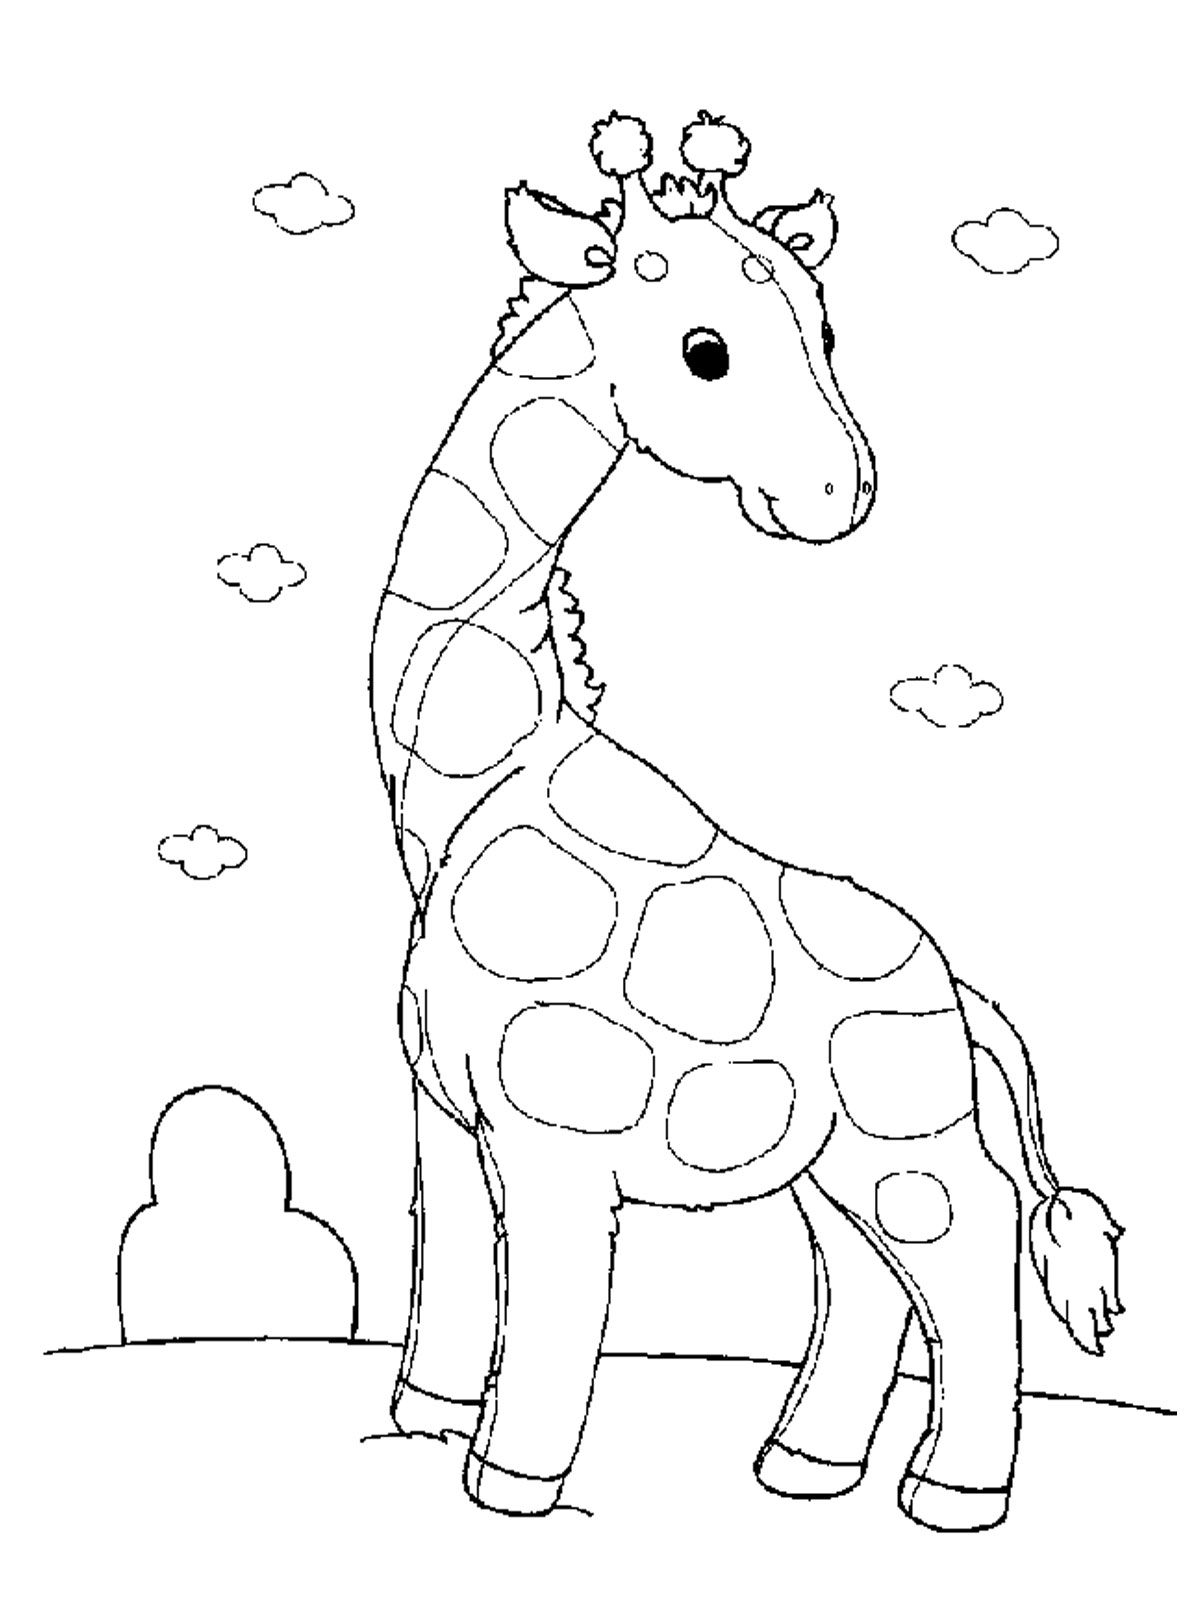 Animal Coloring Pages (7) - Coloring Kids